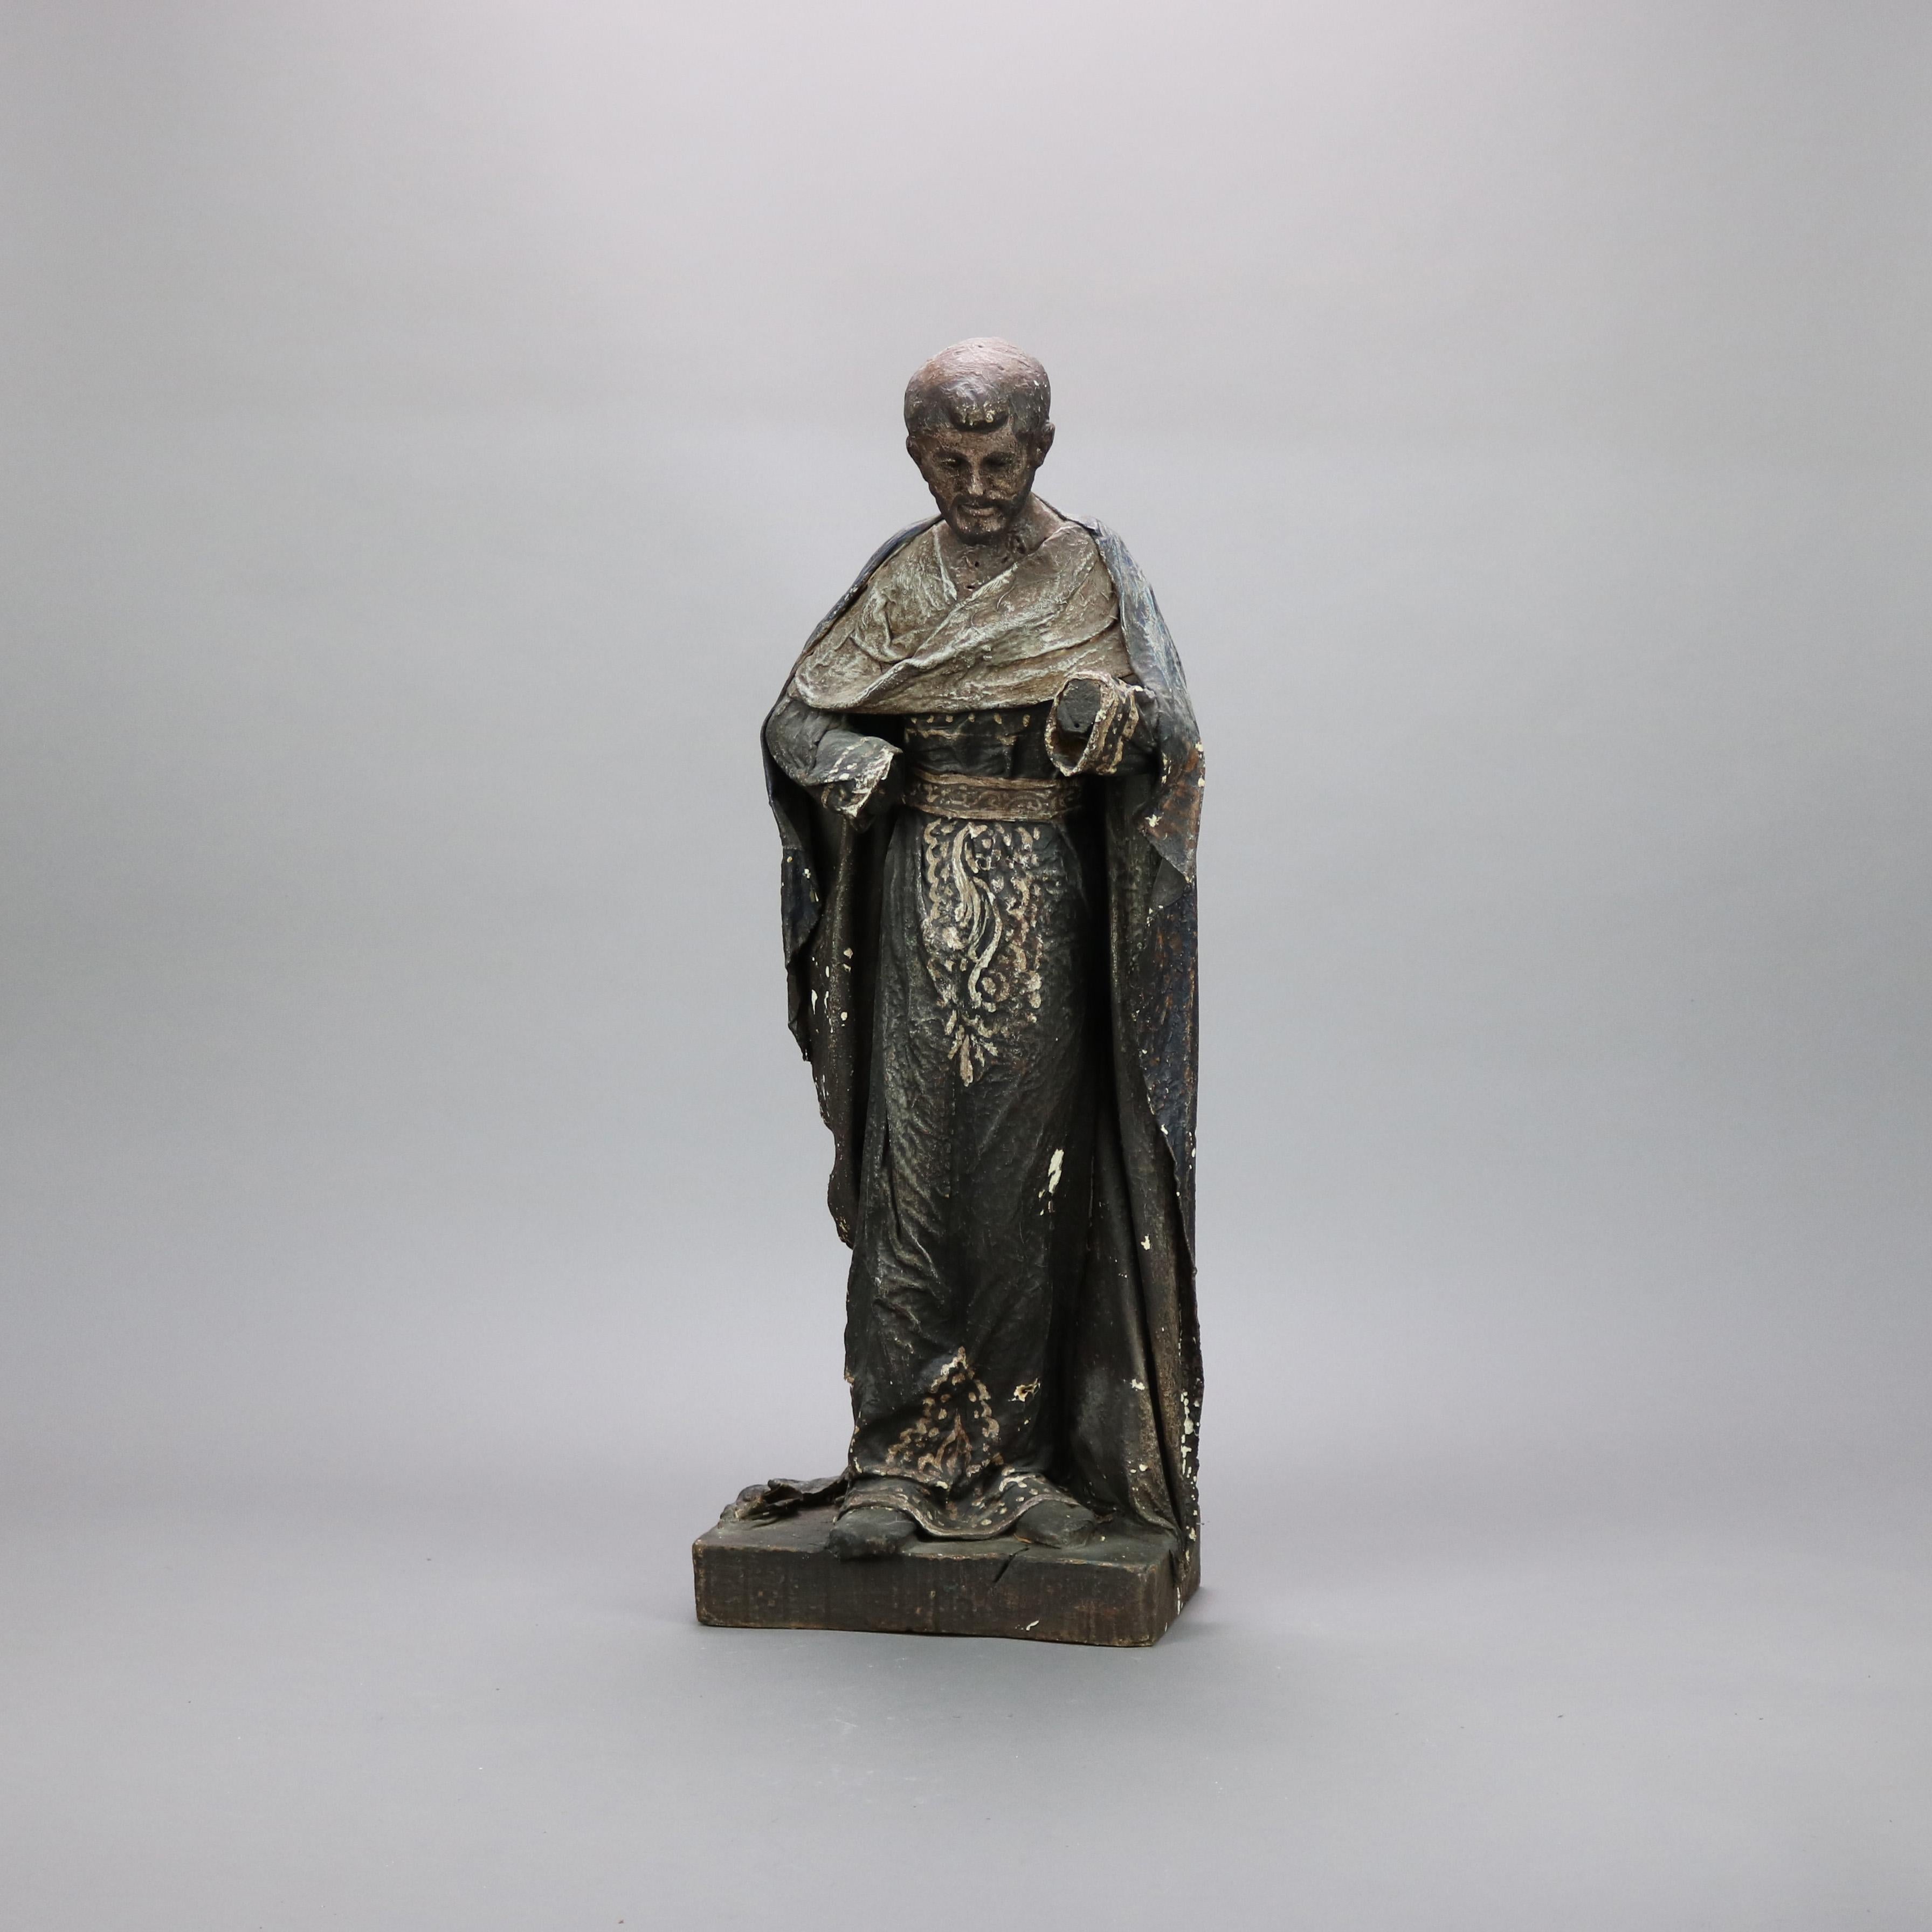 An antique Spanish or Italian Santow figure offers carved wood and paper mache figure of the Catholic Saint Anthony, 19th century

Measures - 25.25''H x 10''W x 8.75''D.